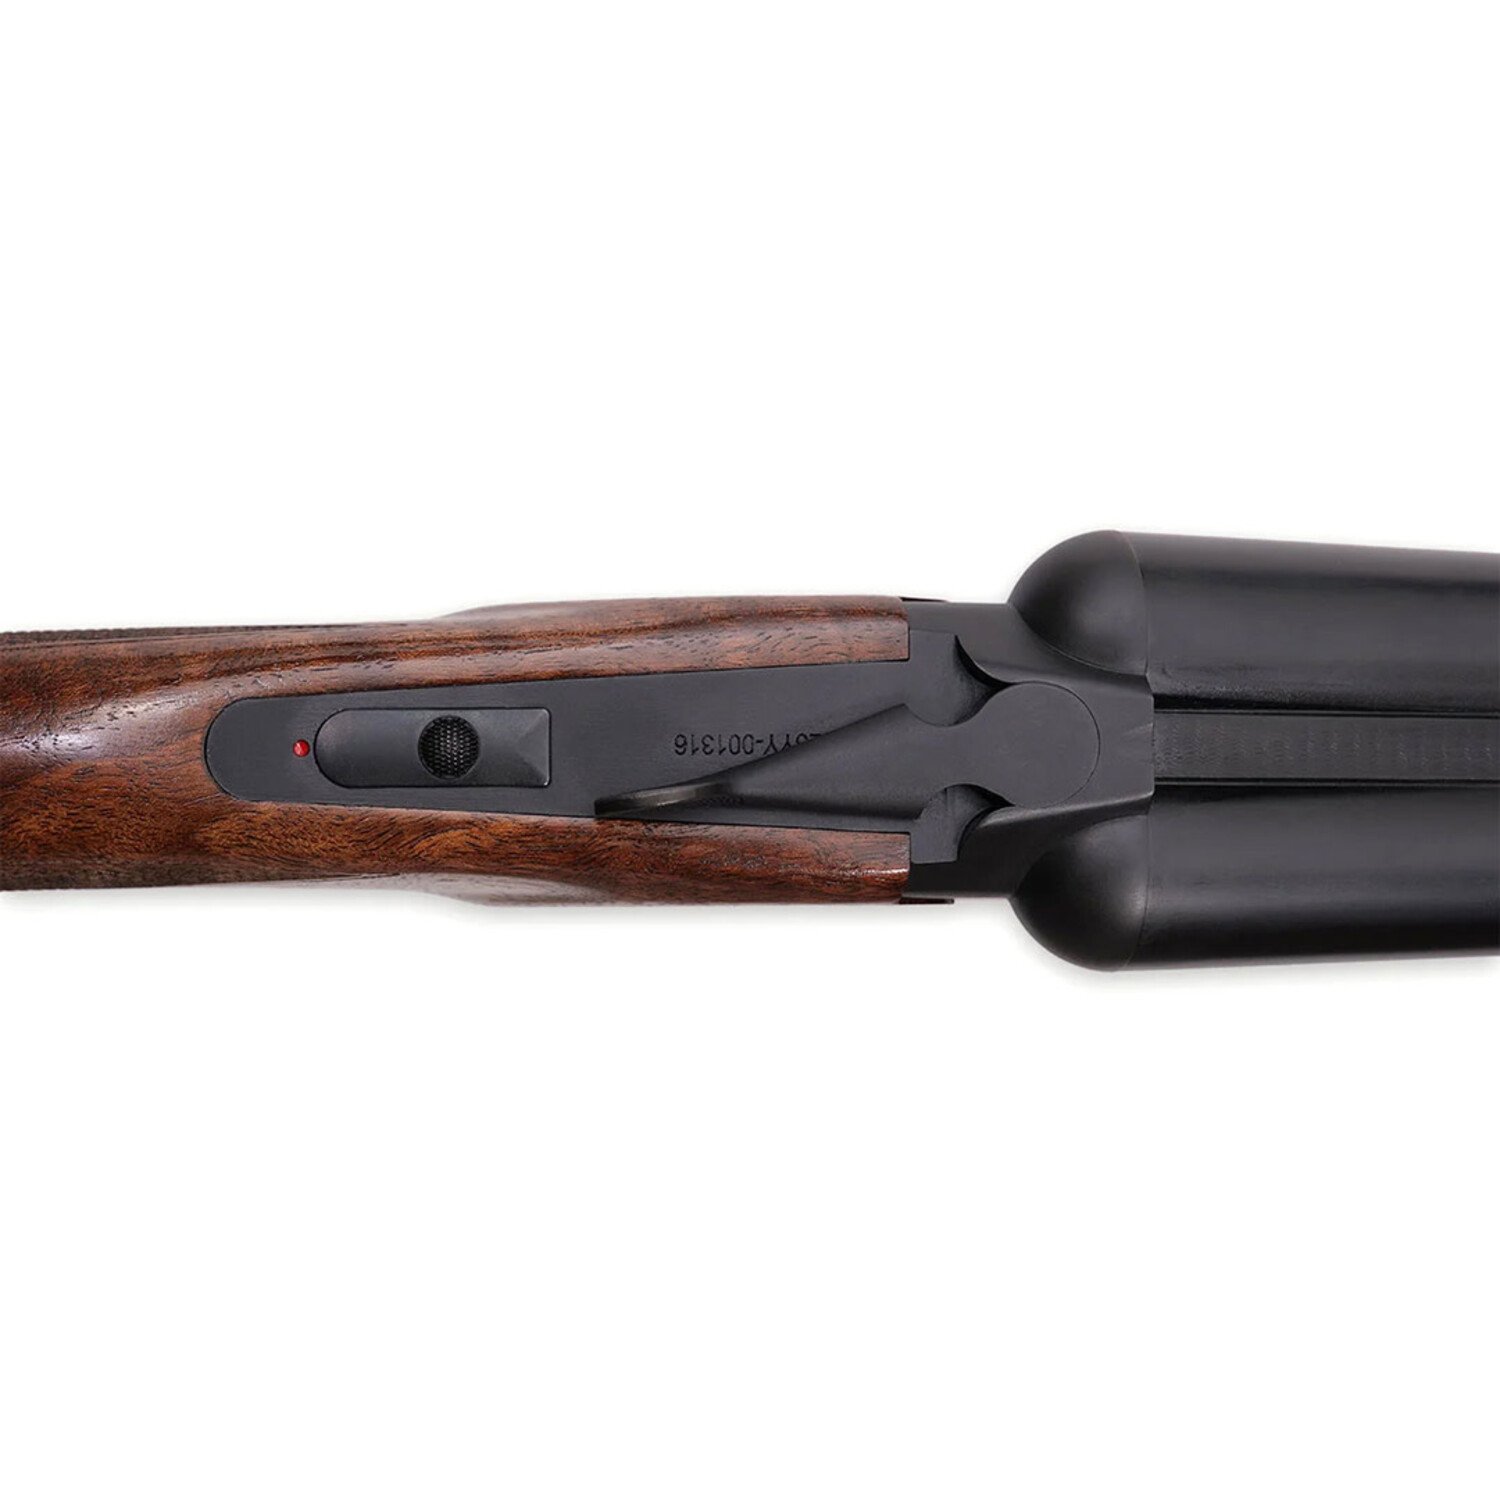 WEATHERBY ORION SXS 20GA 3